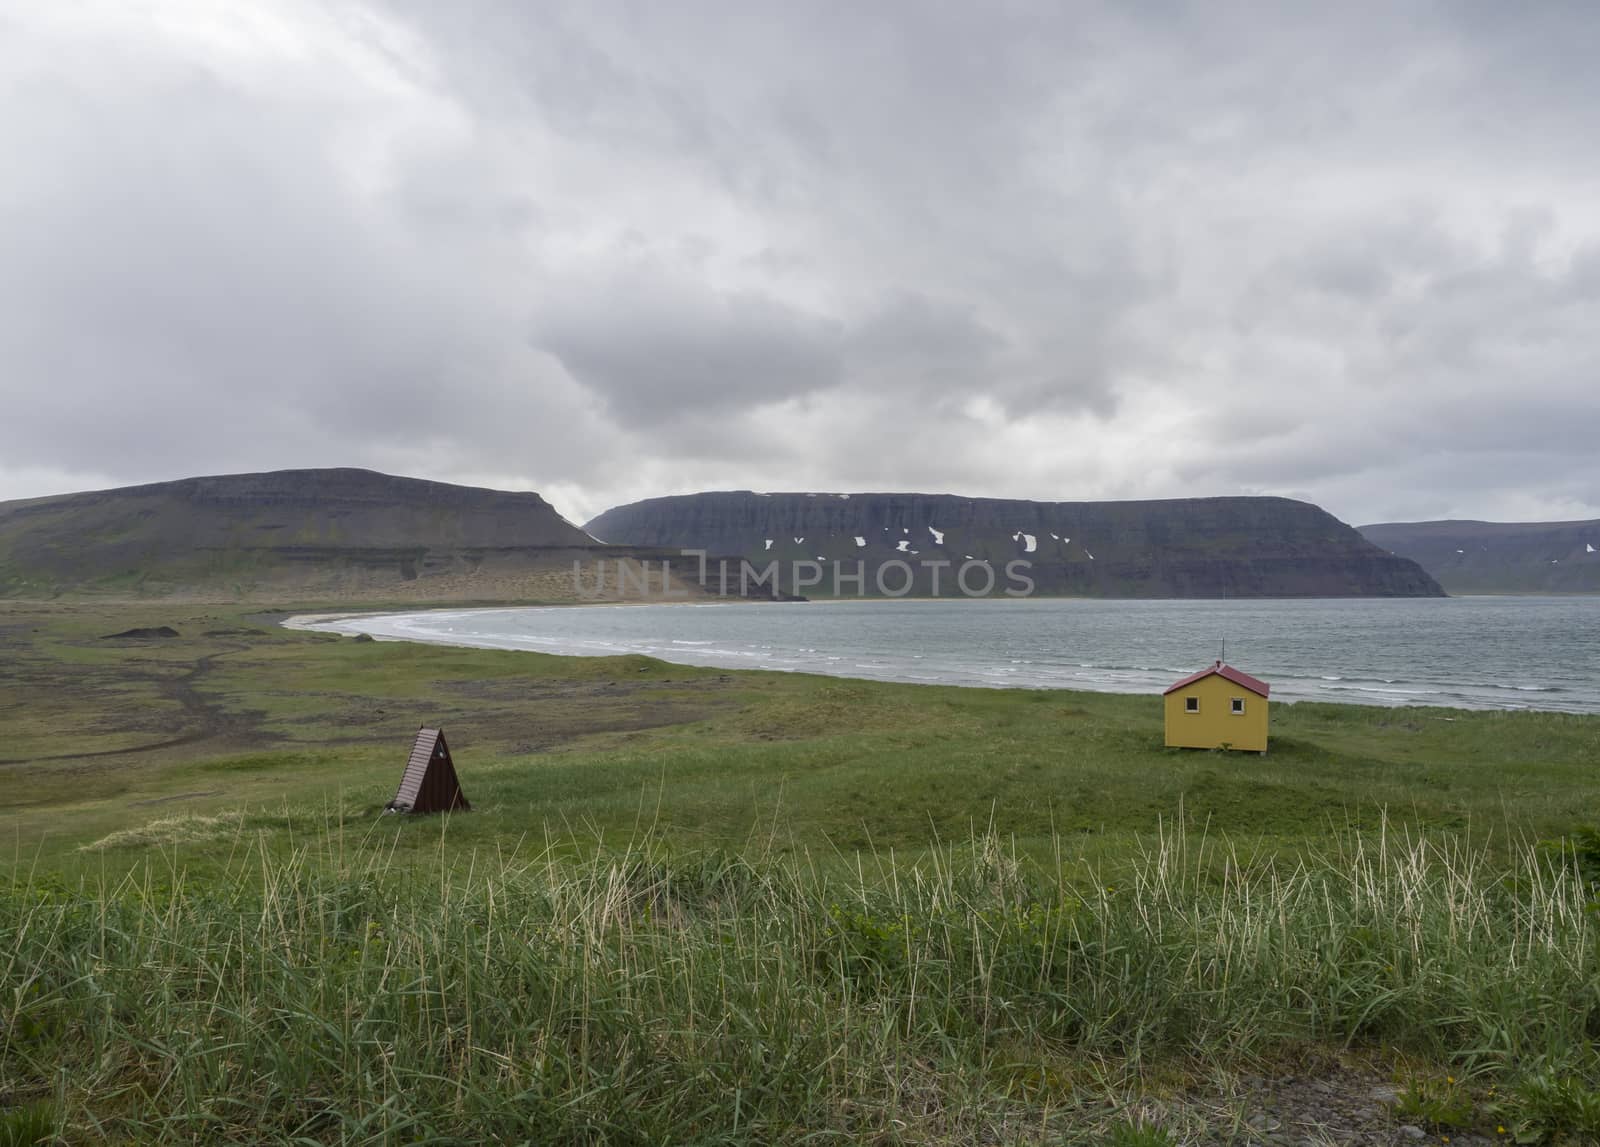 View on latrar camp site in adalvik cove with yellow emergency shelter cabin in west fjords nature reserve Hornstrandir in Iceland, with green grass meadow, stone beach, ocean, snow patched hills and dark clouds background by Henkeova